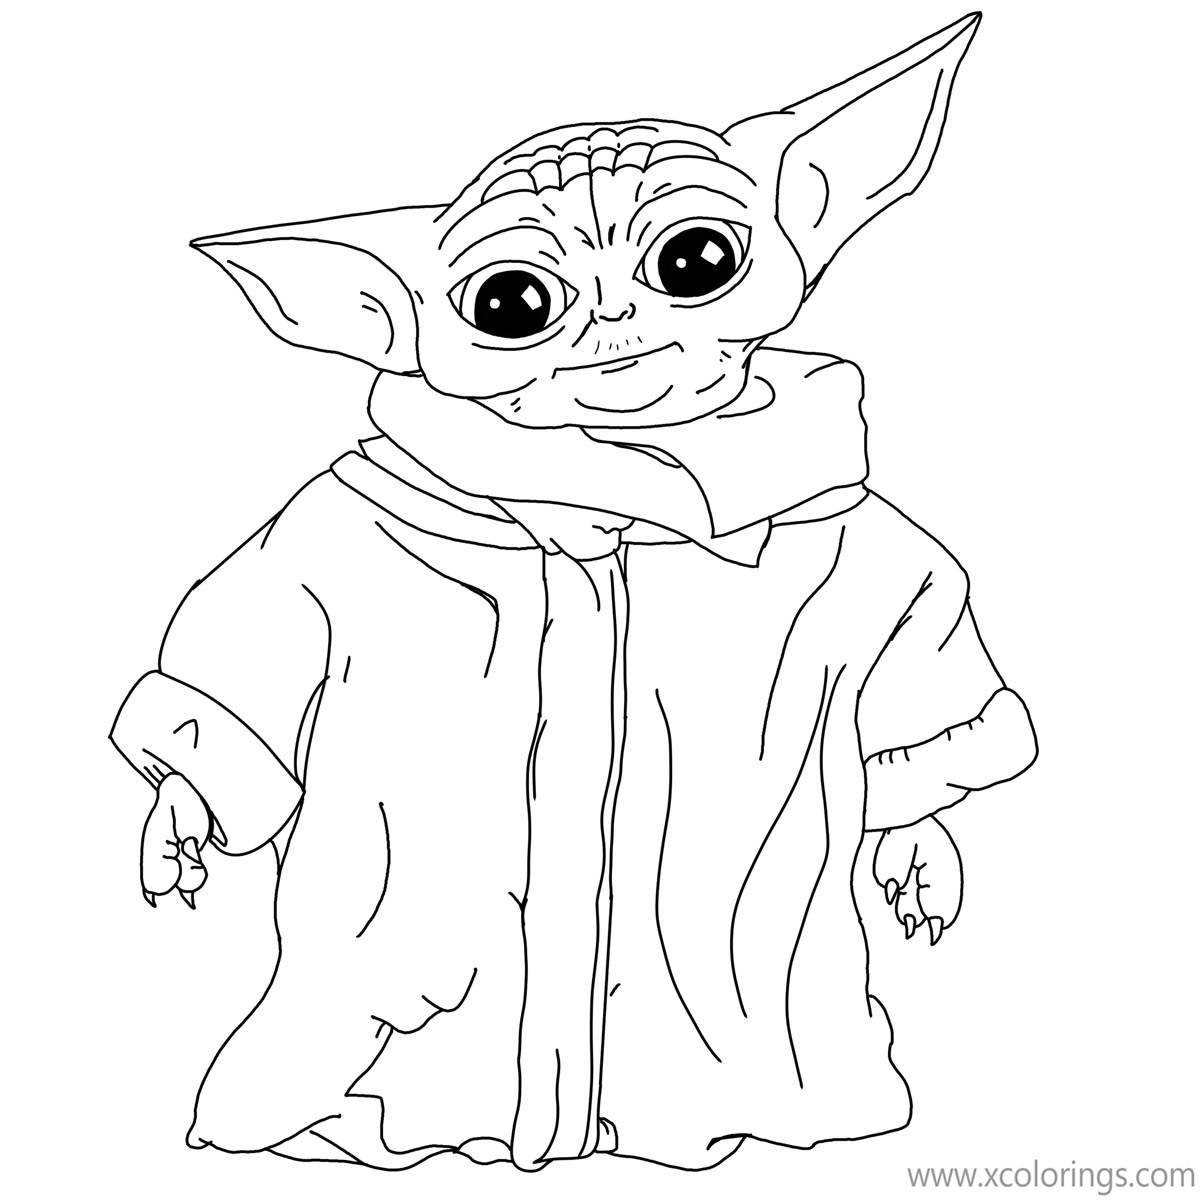 Free Baby Yoda Lineart Coloring Pages printable